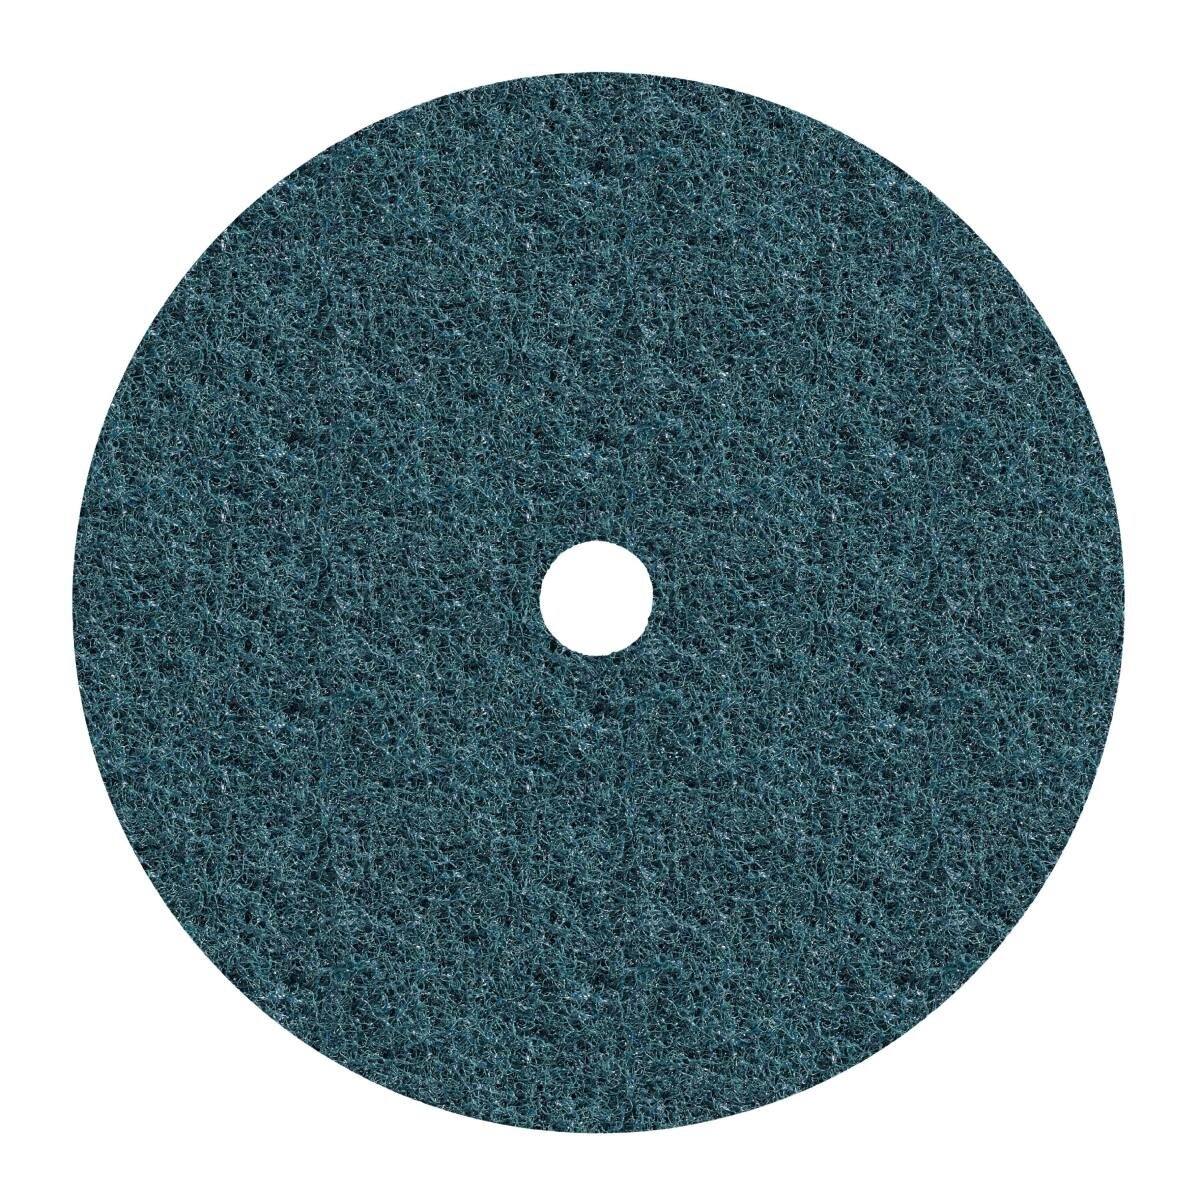 3M Scotch-Brite Non-woven disc SC-DH with centring, blue, 115 mm, 22 mm, A, very fine 60983